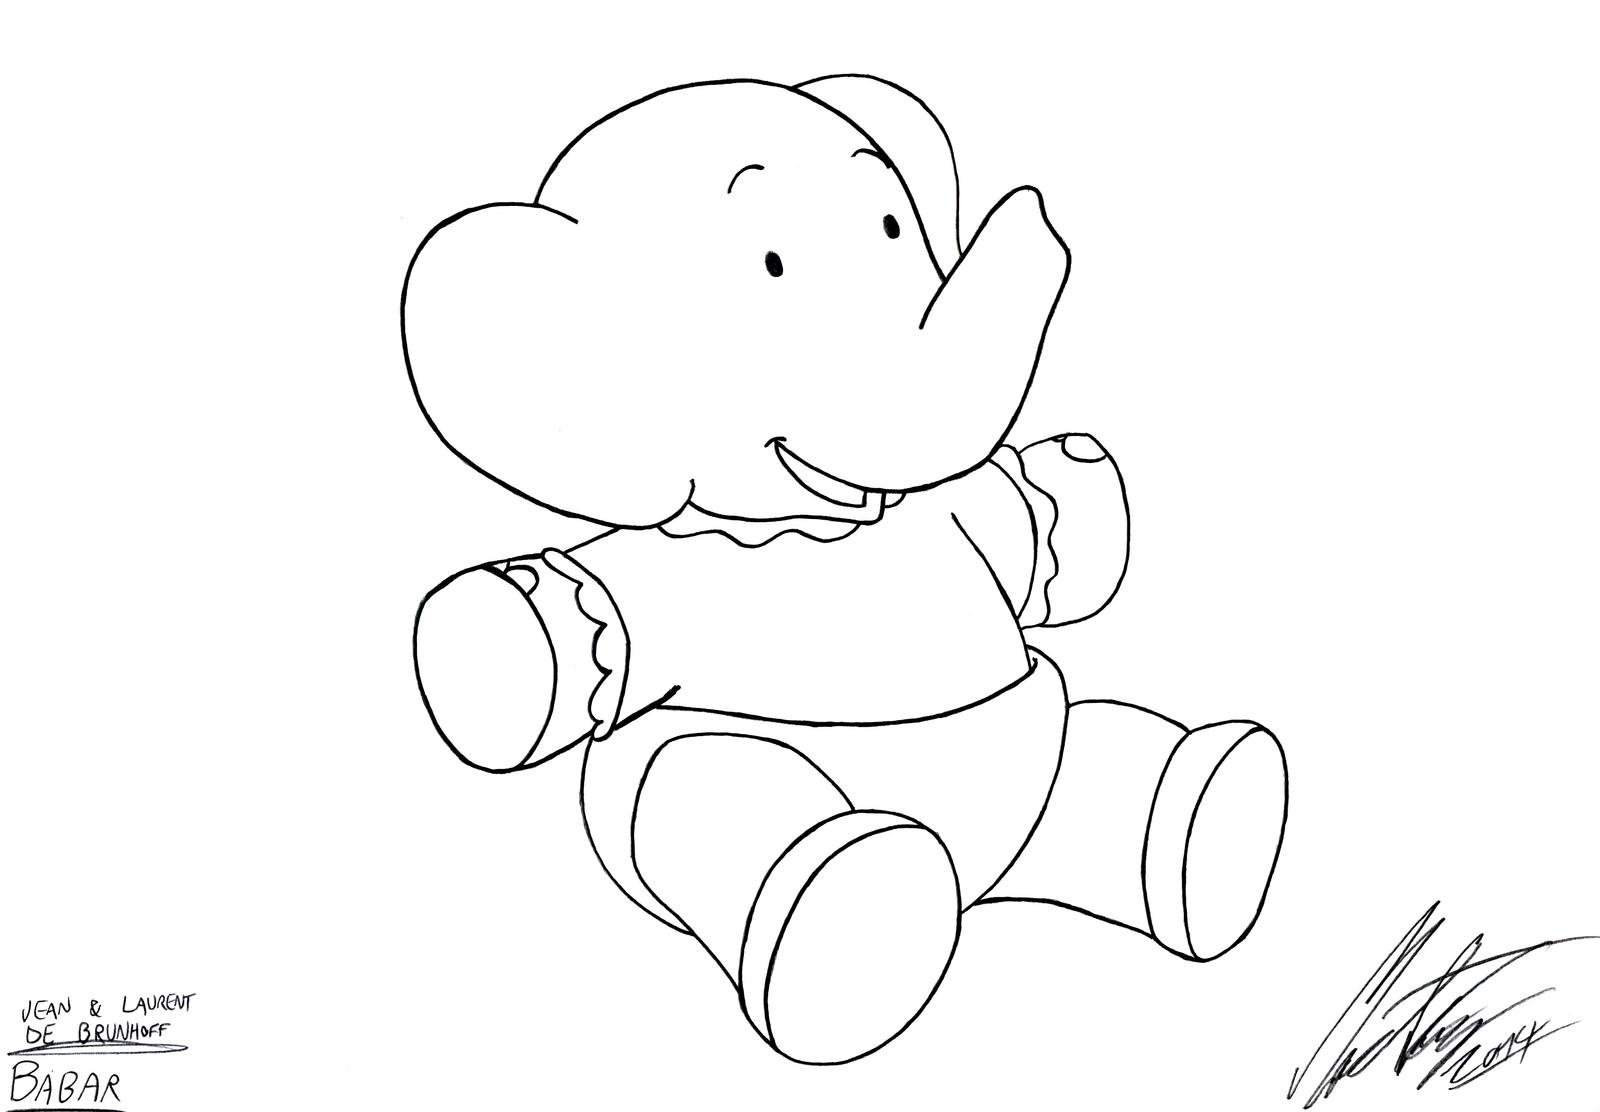 babar the elephant coloring pages - photo #50